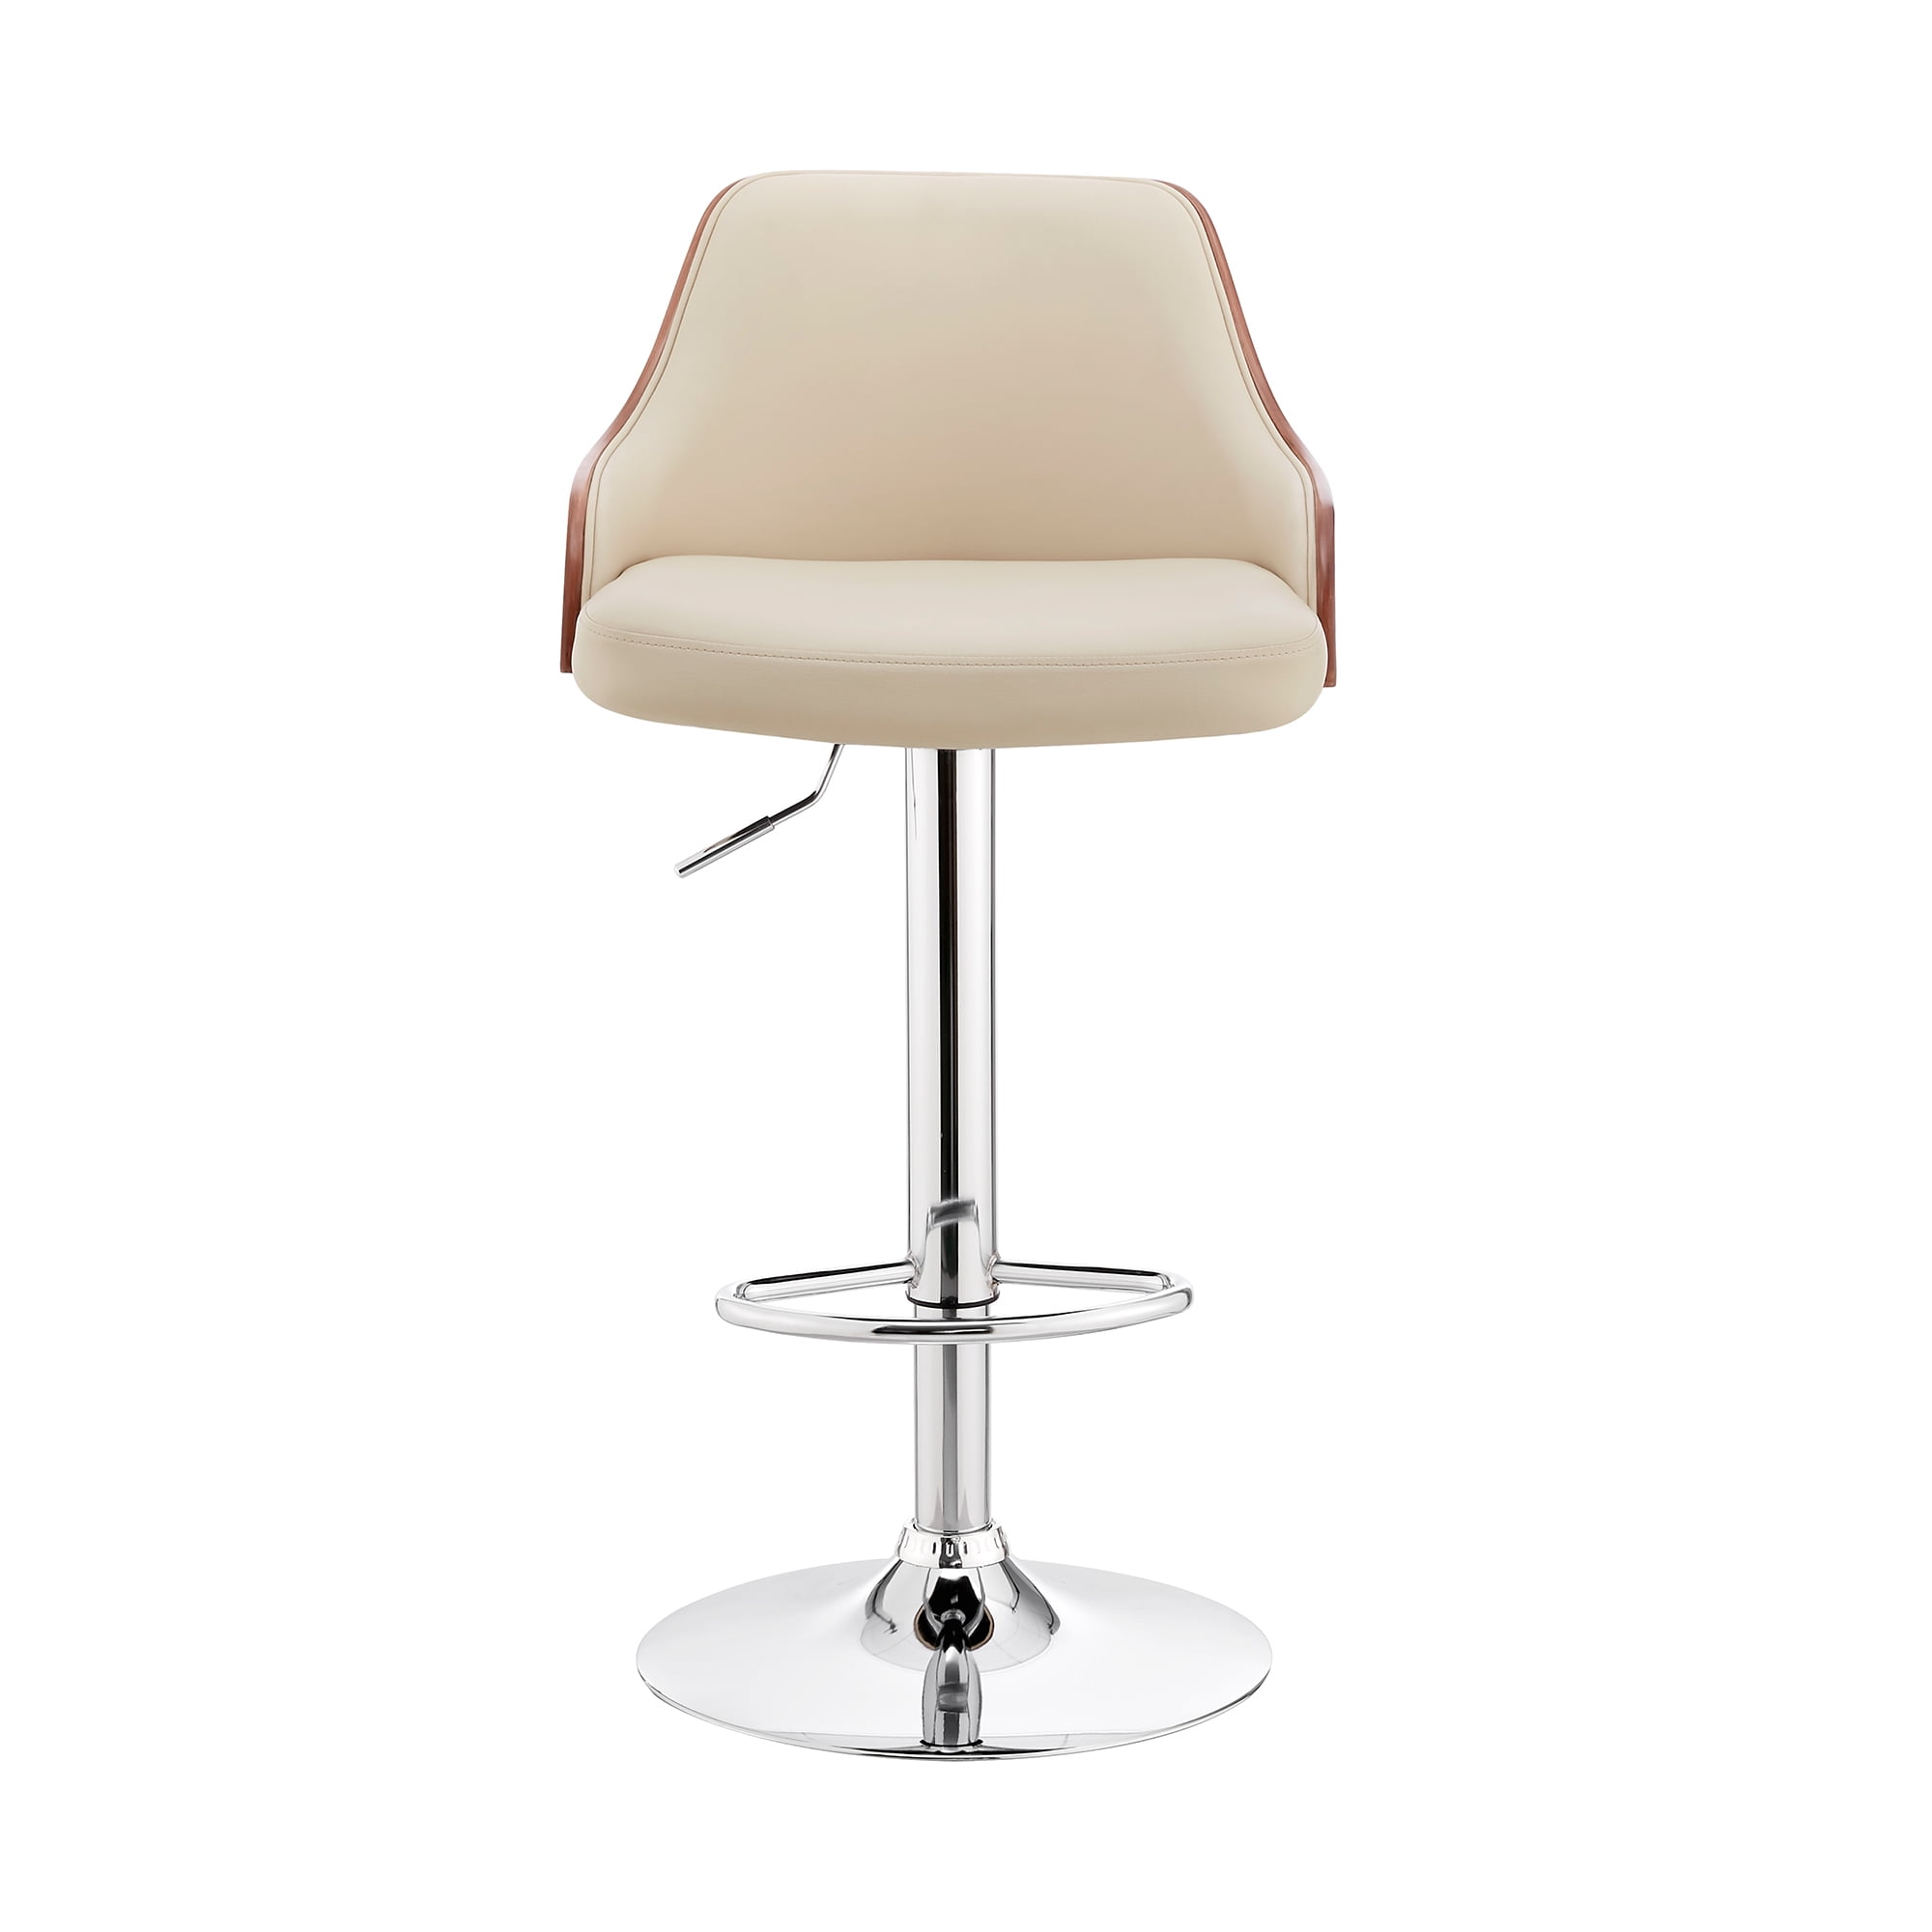 Armen Living Asher Adjustable Cream Faux Leather and Chrome Finish Bar Stool 